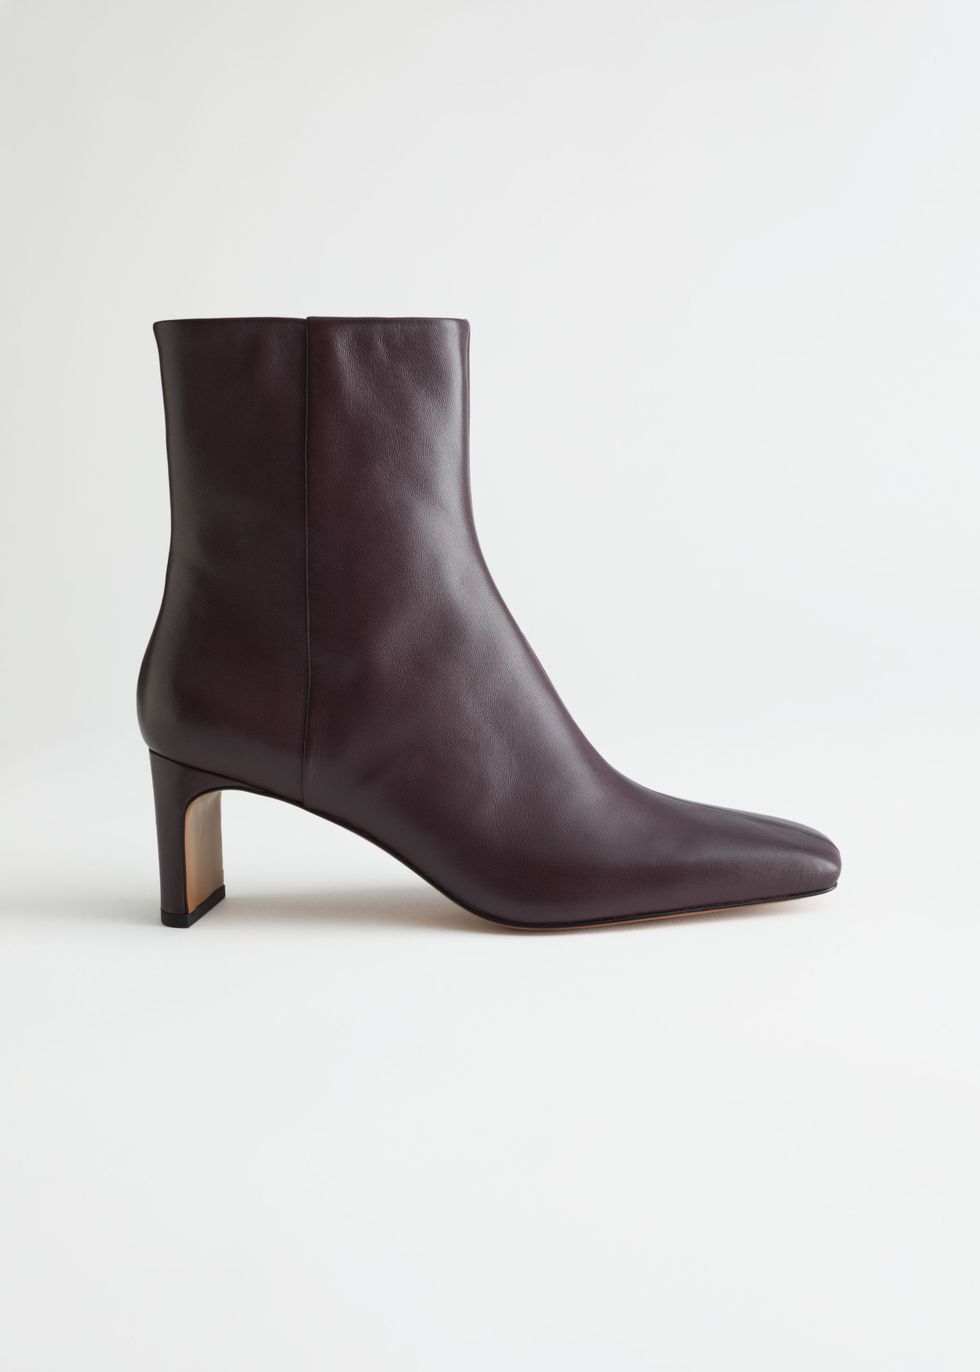 STIVALETTI BASSI / ANKLE BOOTS